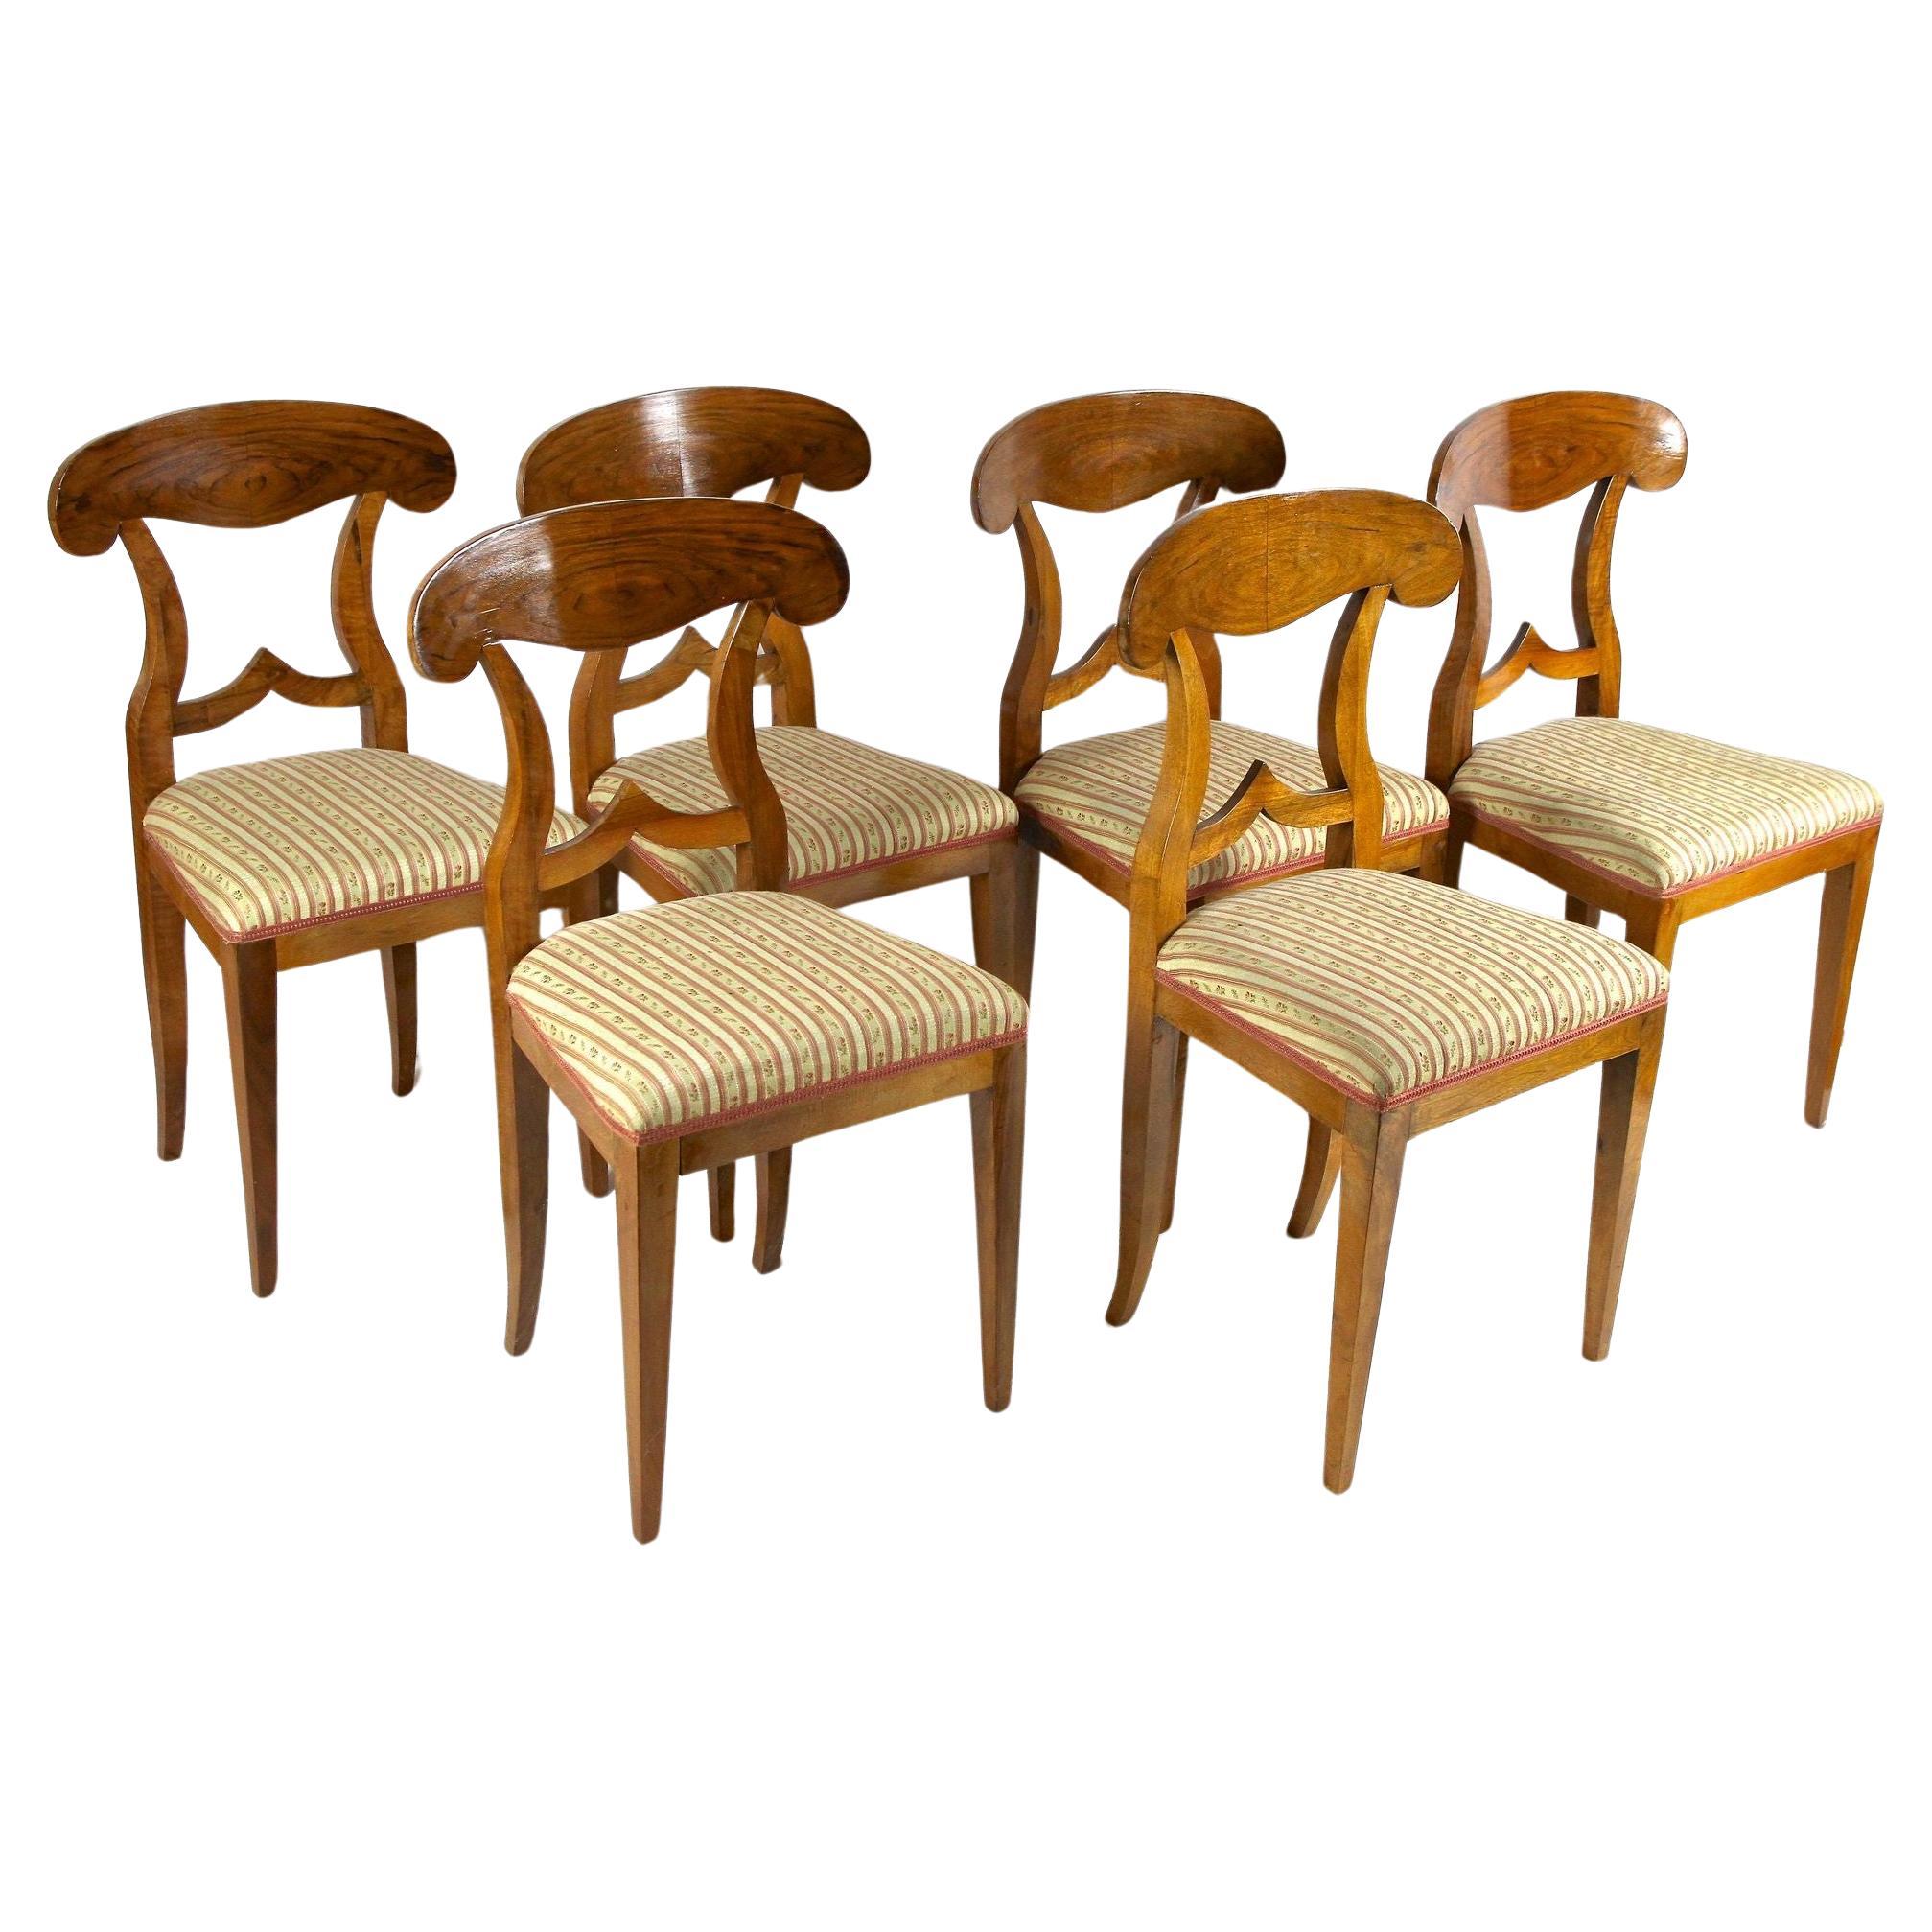 Set Of 6 Biedermeier Nutwood Shovel Dining Chairs, 19th Century, AT ca. 1830 For Sale